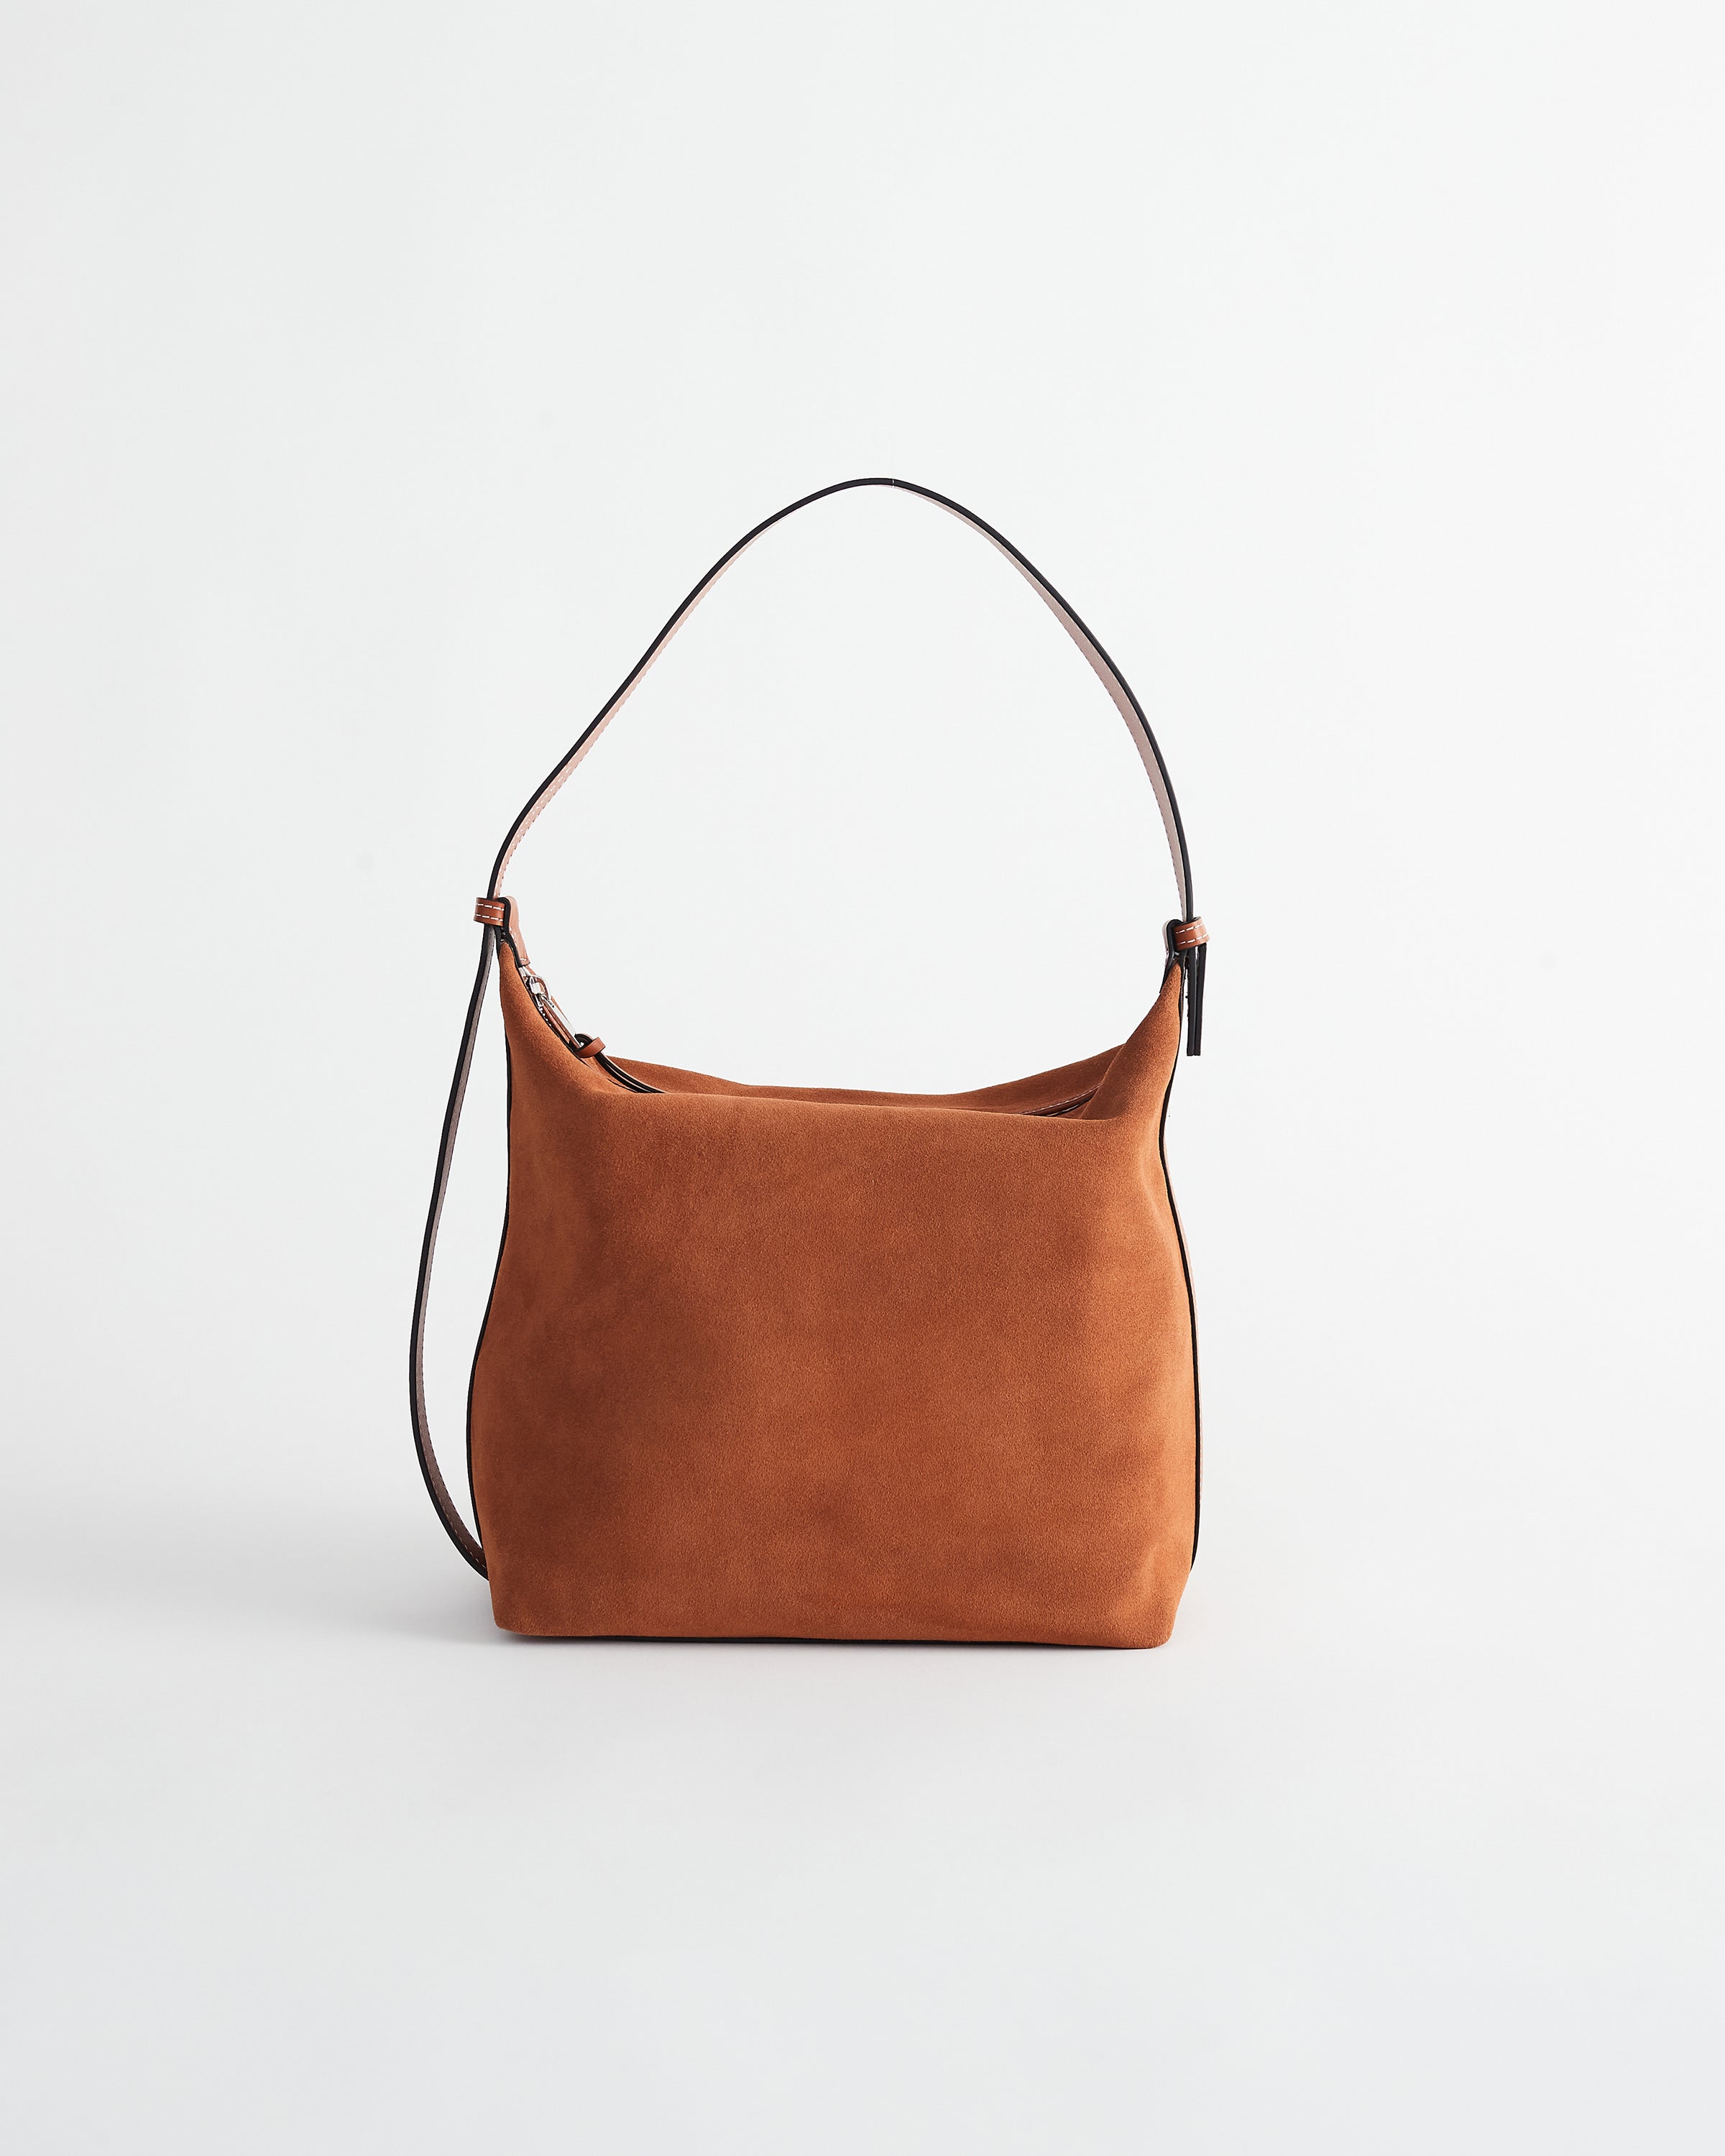 The Daisy Suede Everyday Handbag in Tan by The Horse®